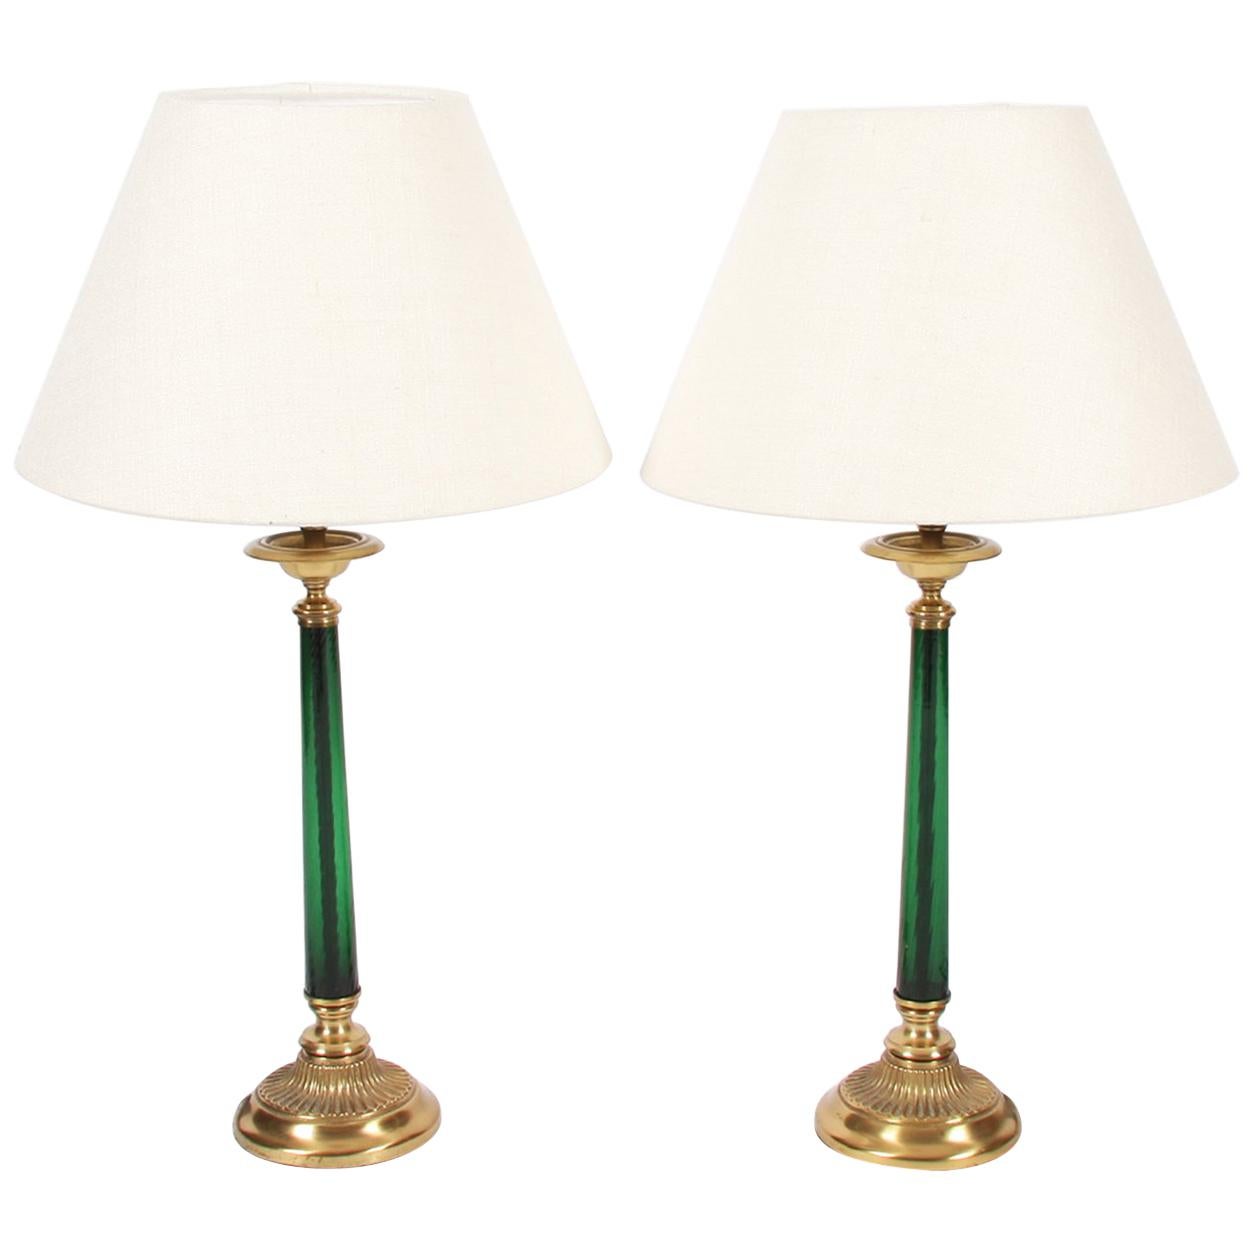 Pair of Glass and Brass Table Lamps